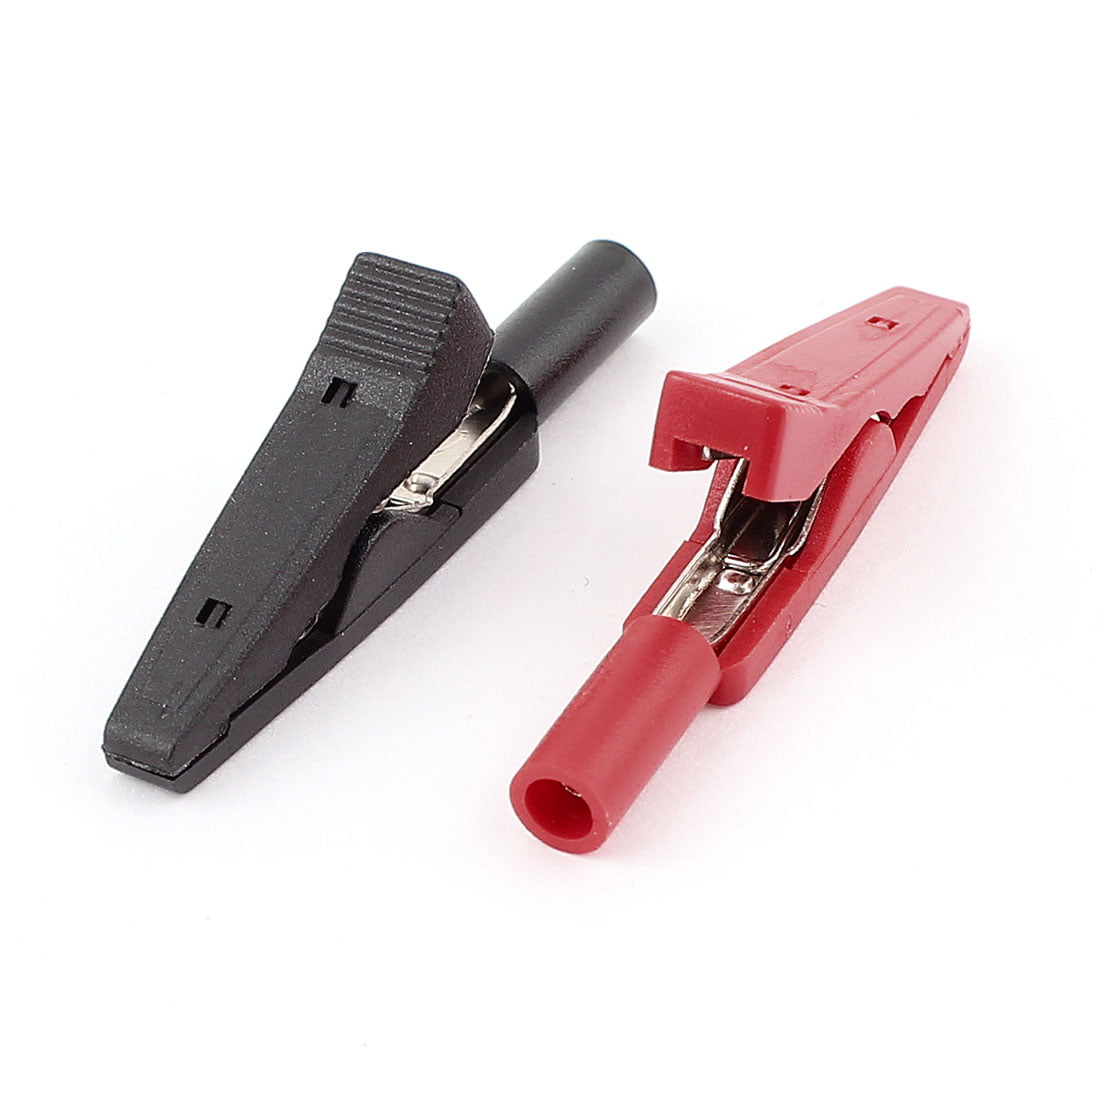 2X Red Black Alligator Clip Clamp to 4mm Banana Female Jack Test Adapter.PI 